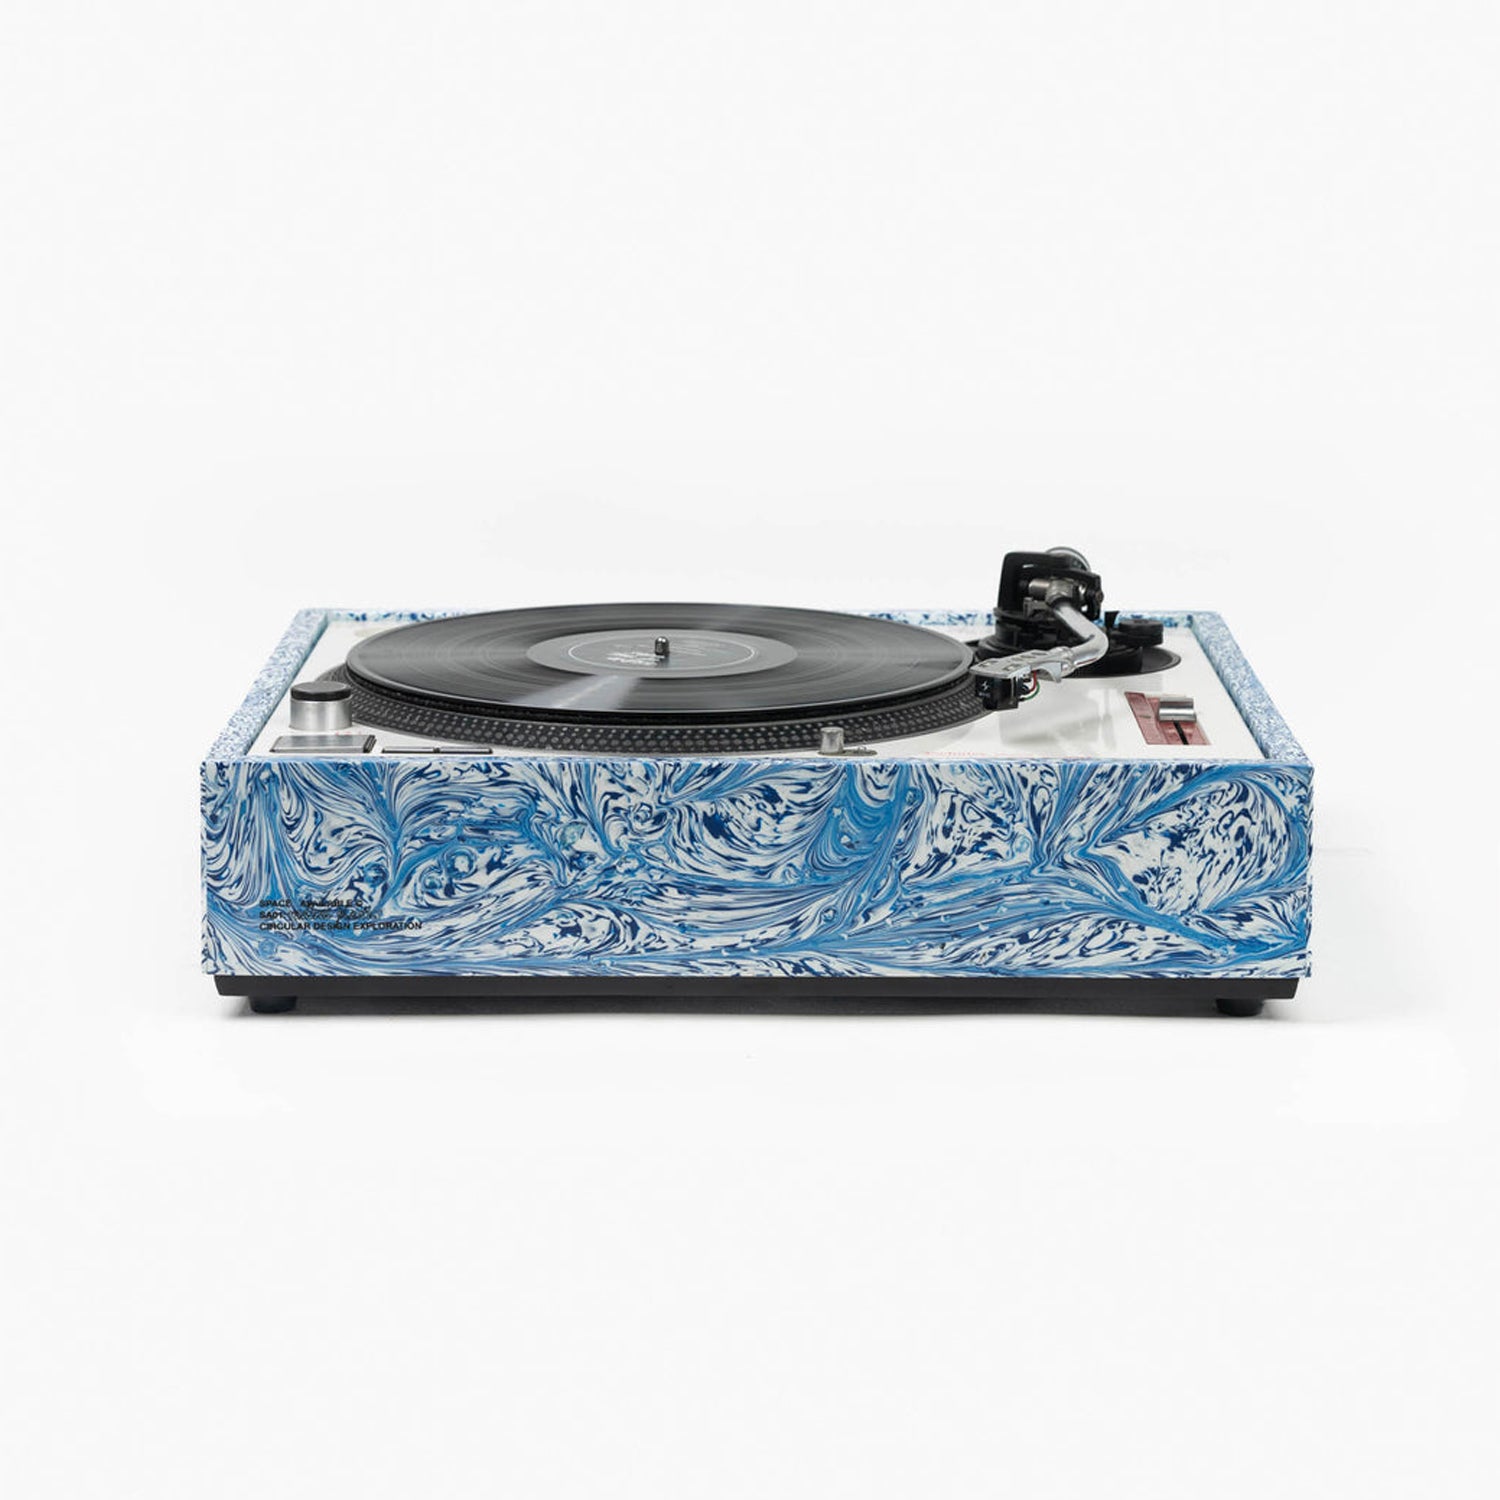 [SPACE AVAILABLE] TECHNICS 1210/1200 TURNTABLE CASING _ BLUE WAVE